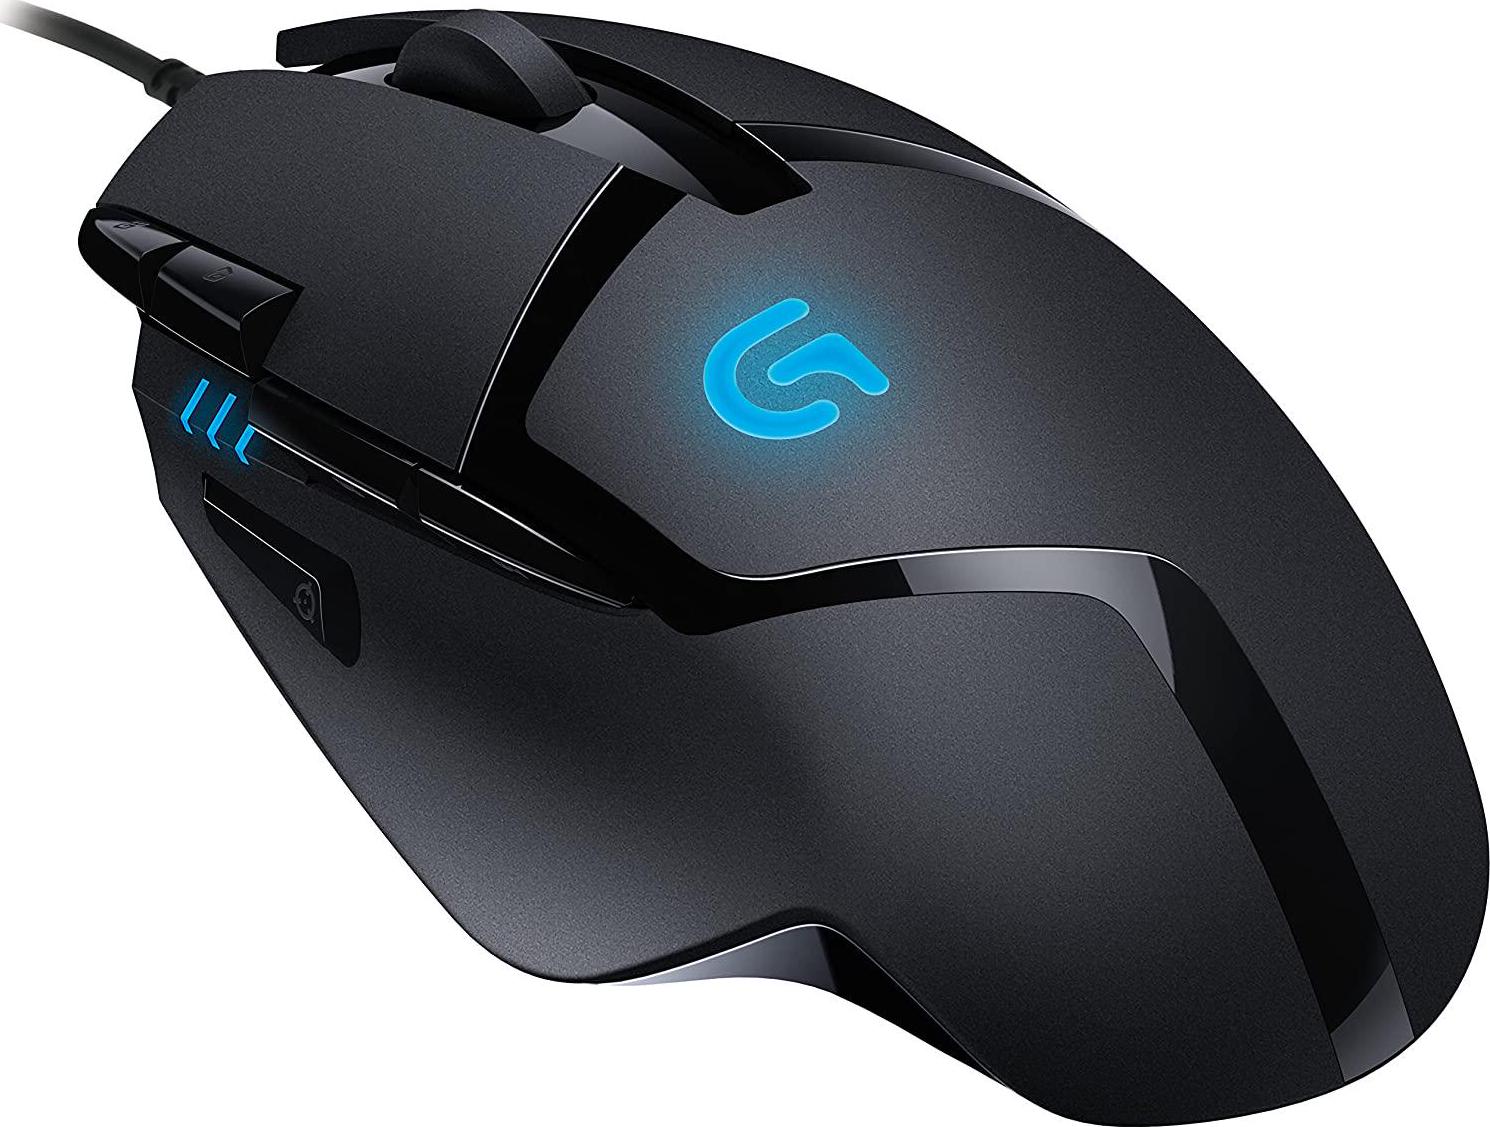 Logitech G, G402 Hyperion Fury FPS Gaming Mouse